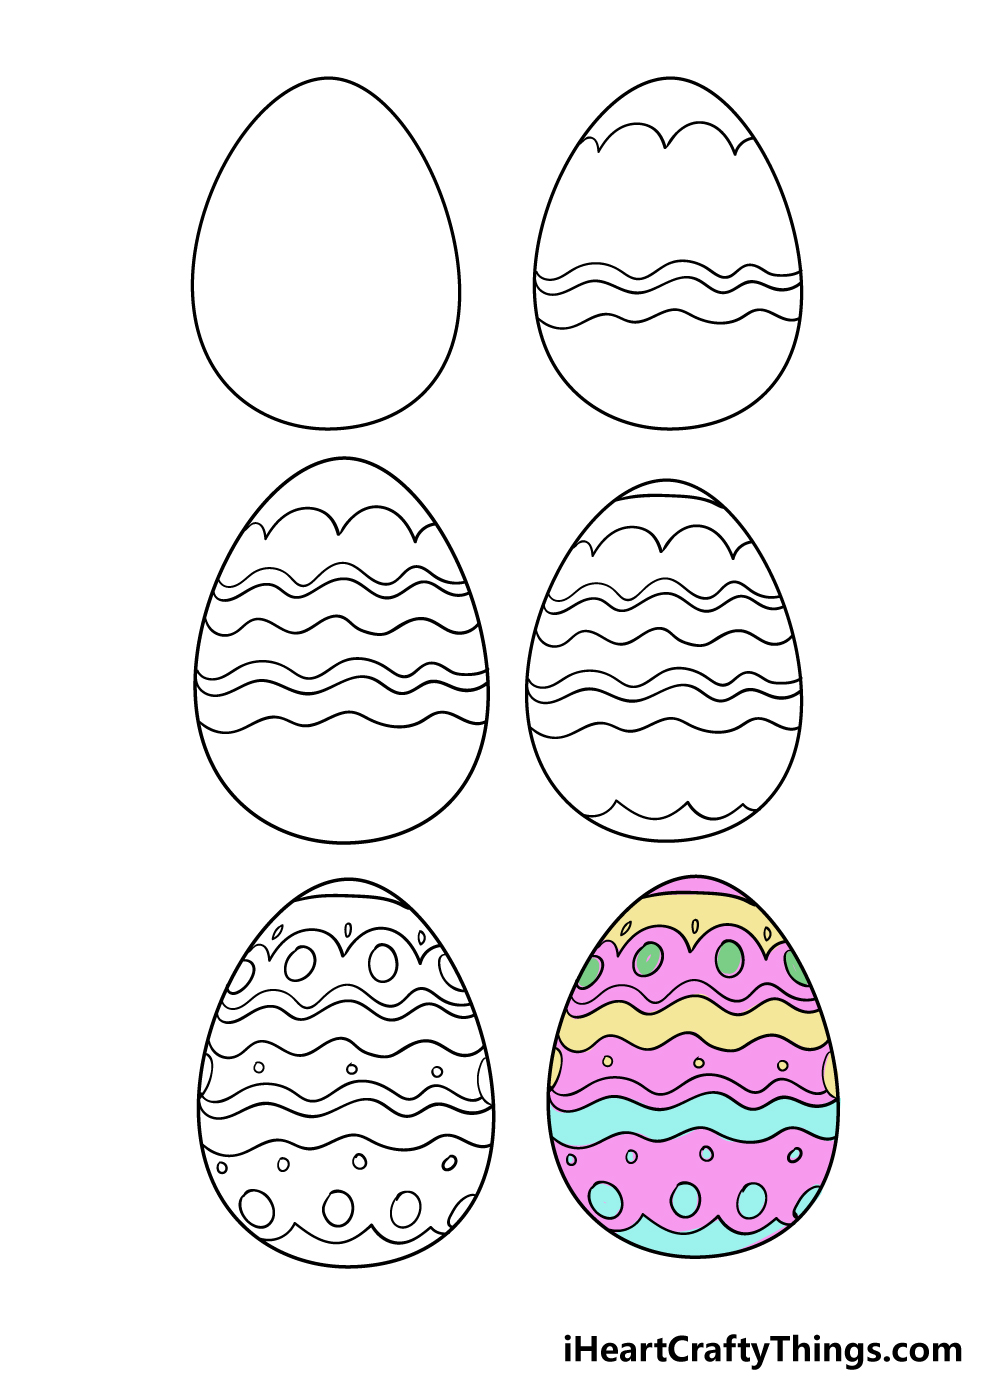 Draw an easter egg